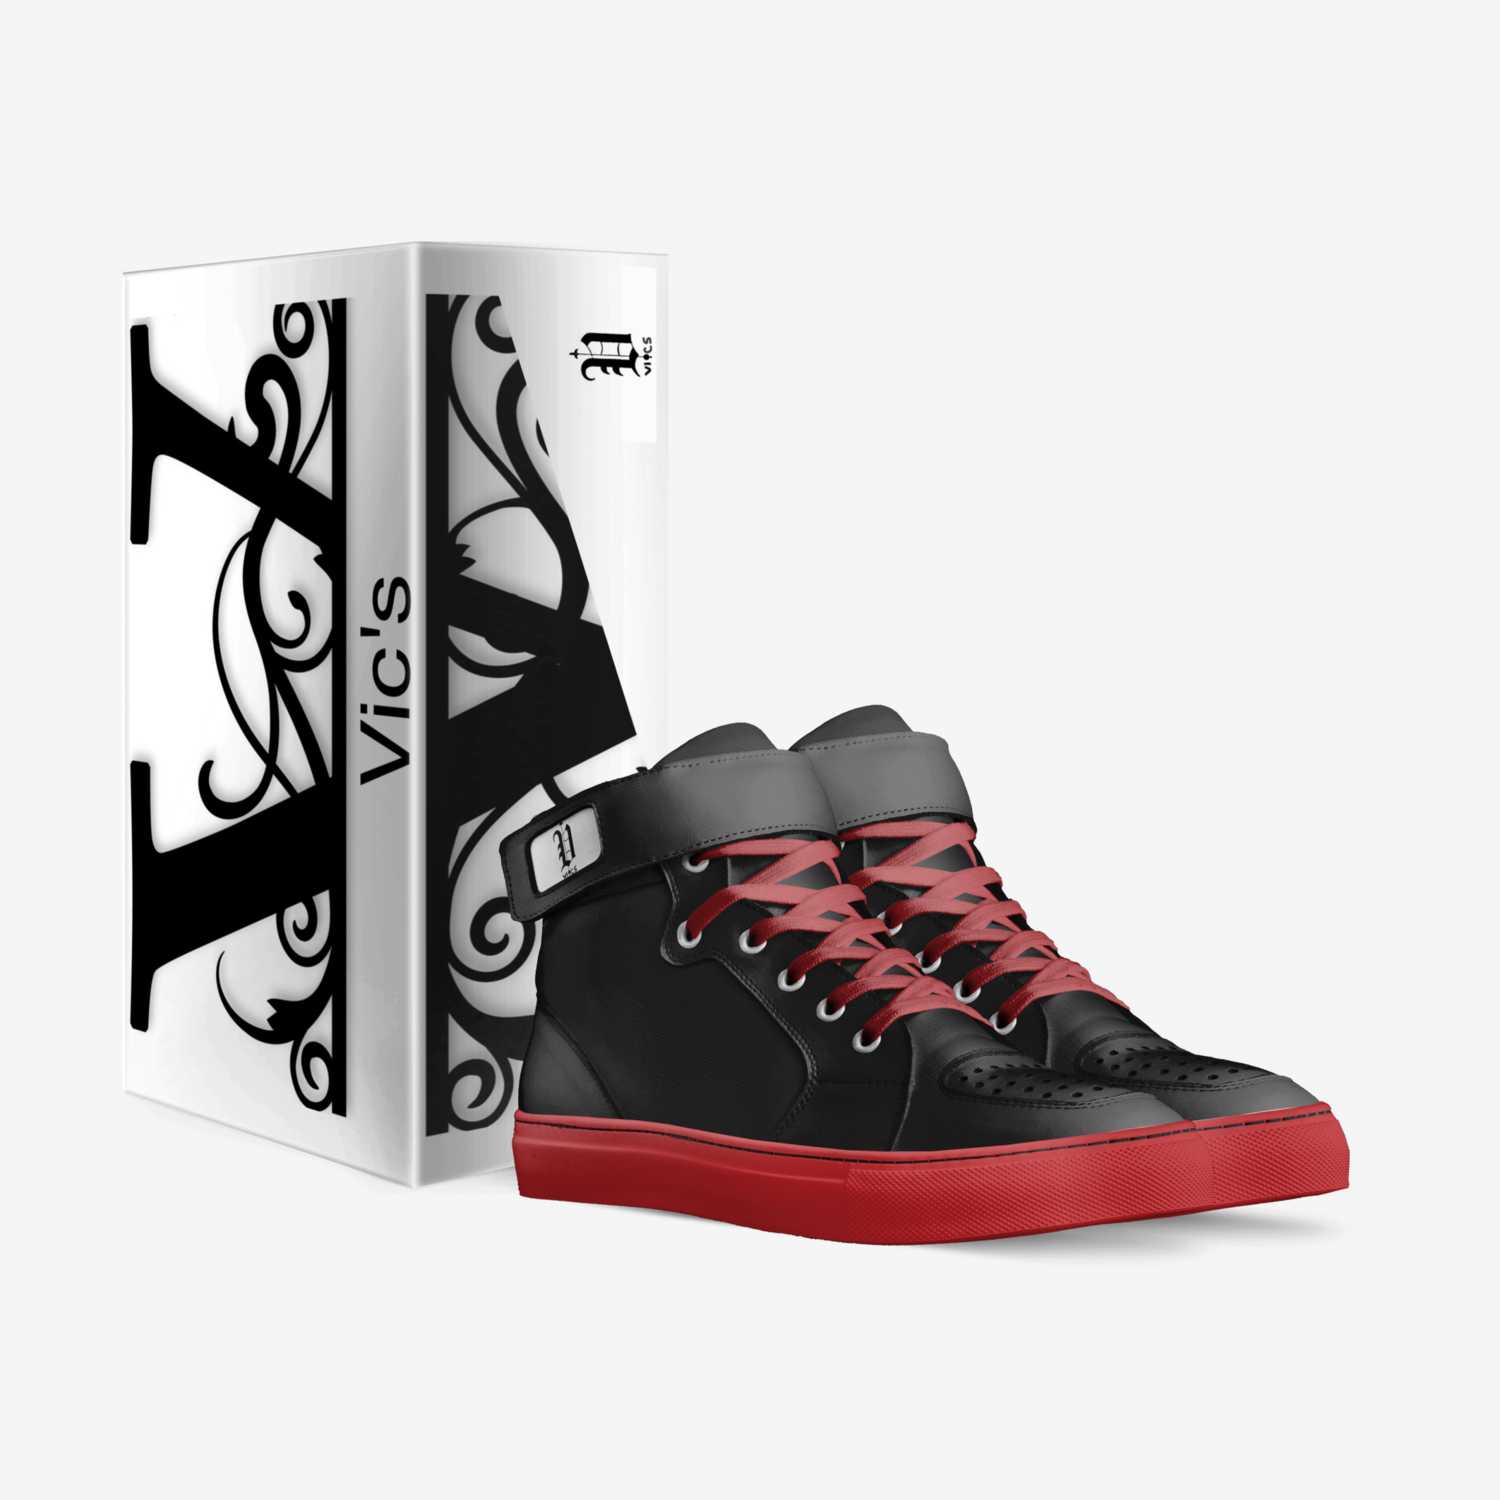 Vics rule custom made in Italy shoes by Brayden Murphy | Box view